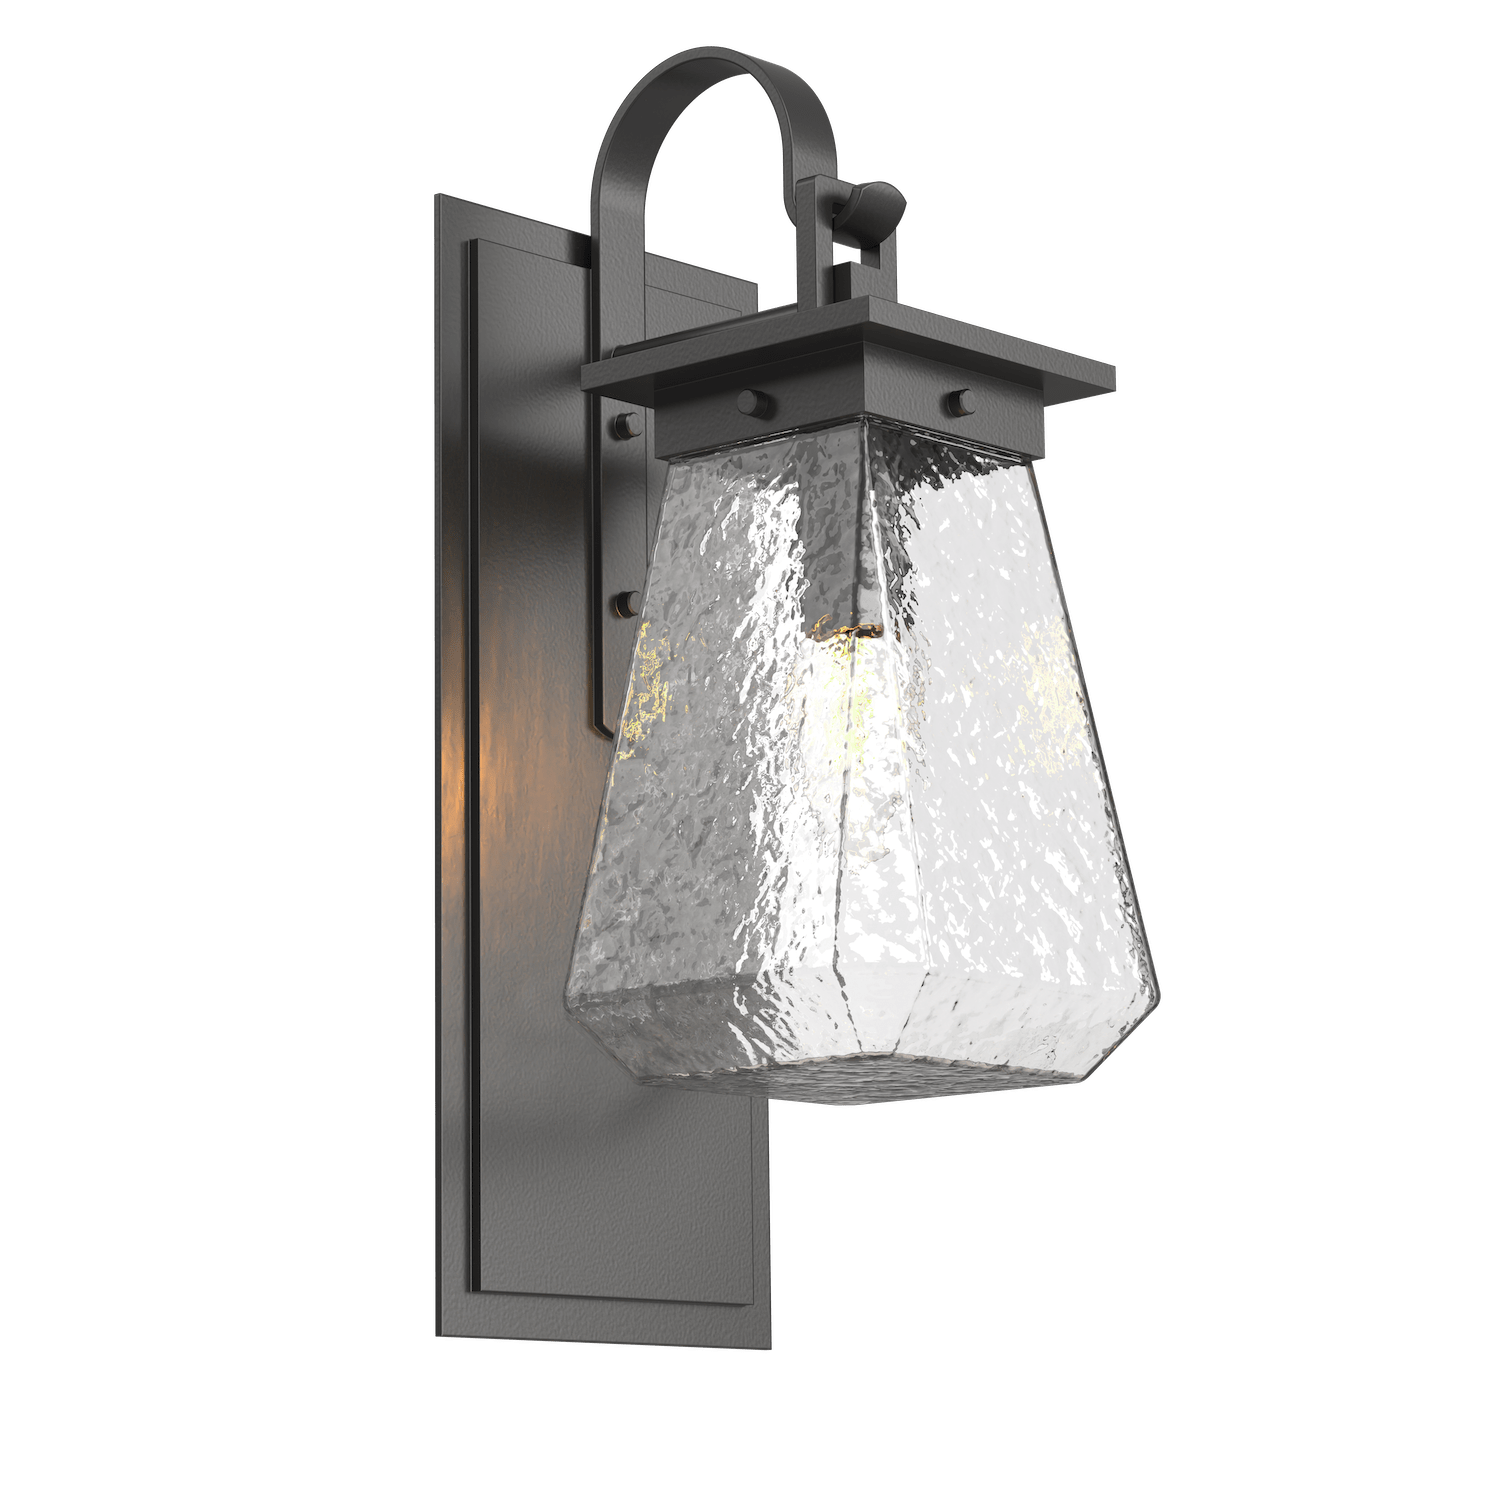 ODB0043-AC-AG-C-Hammerton-Studio-Beacon-18-inch-outdoor-sconce-with-shepherds-hook-with-argento-grey-finish-and-clear-blown-glass-shades-and-incandescent-lamping